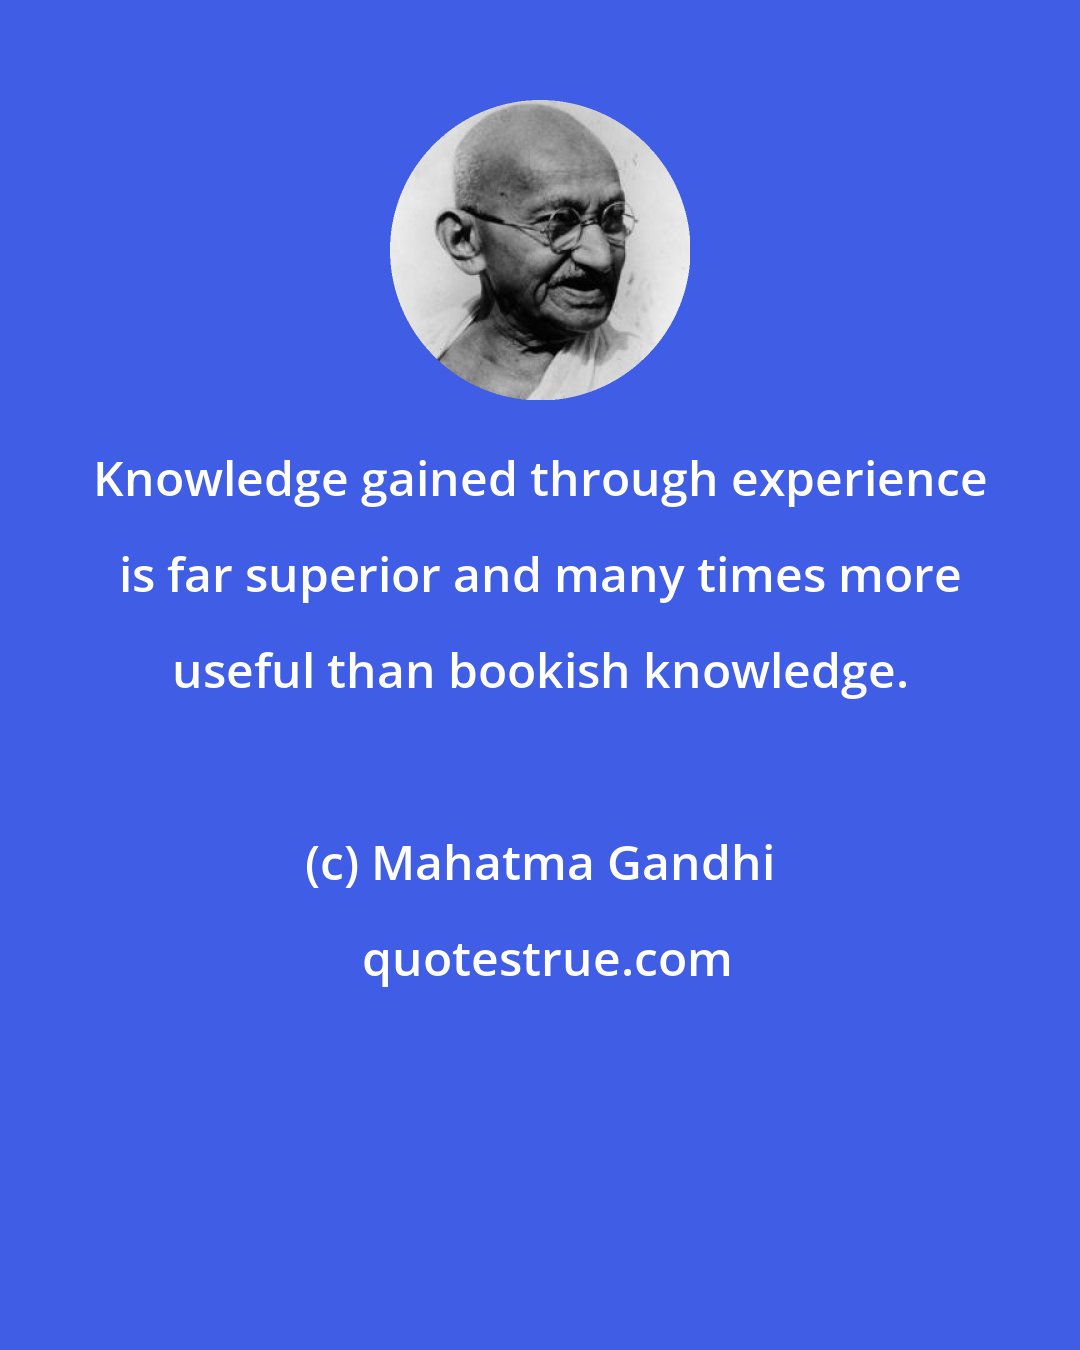 Mahatma Gandhi: Knowledge gained through experience is far superior and many times more useful than bookish knowledge.